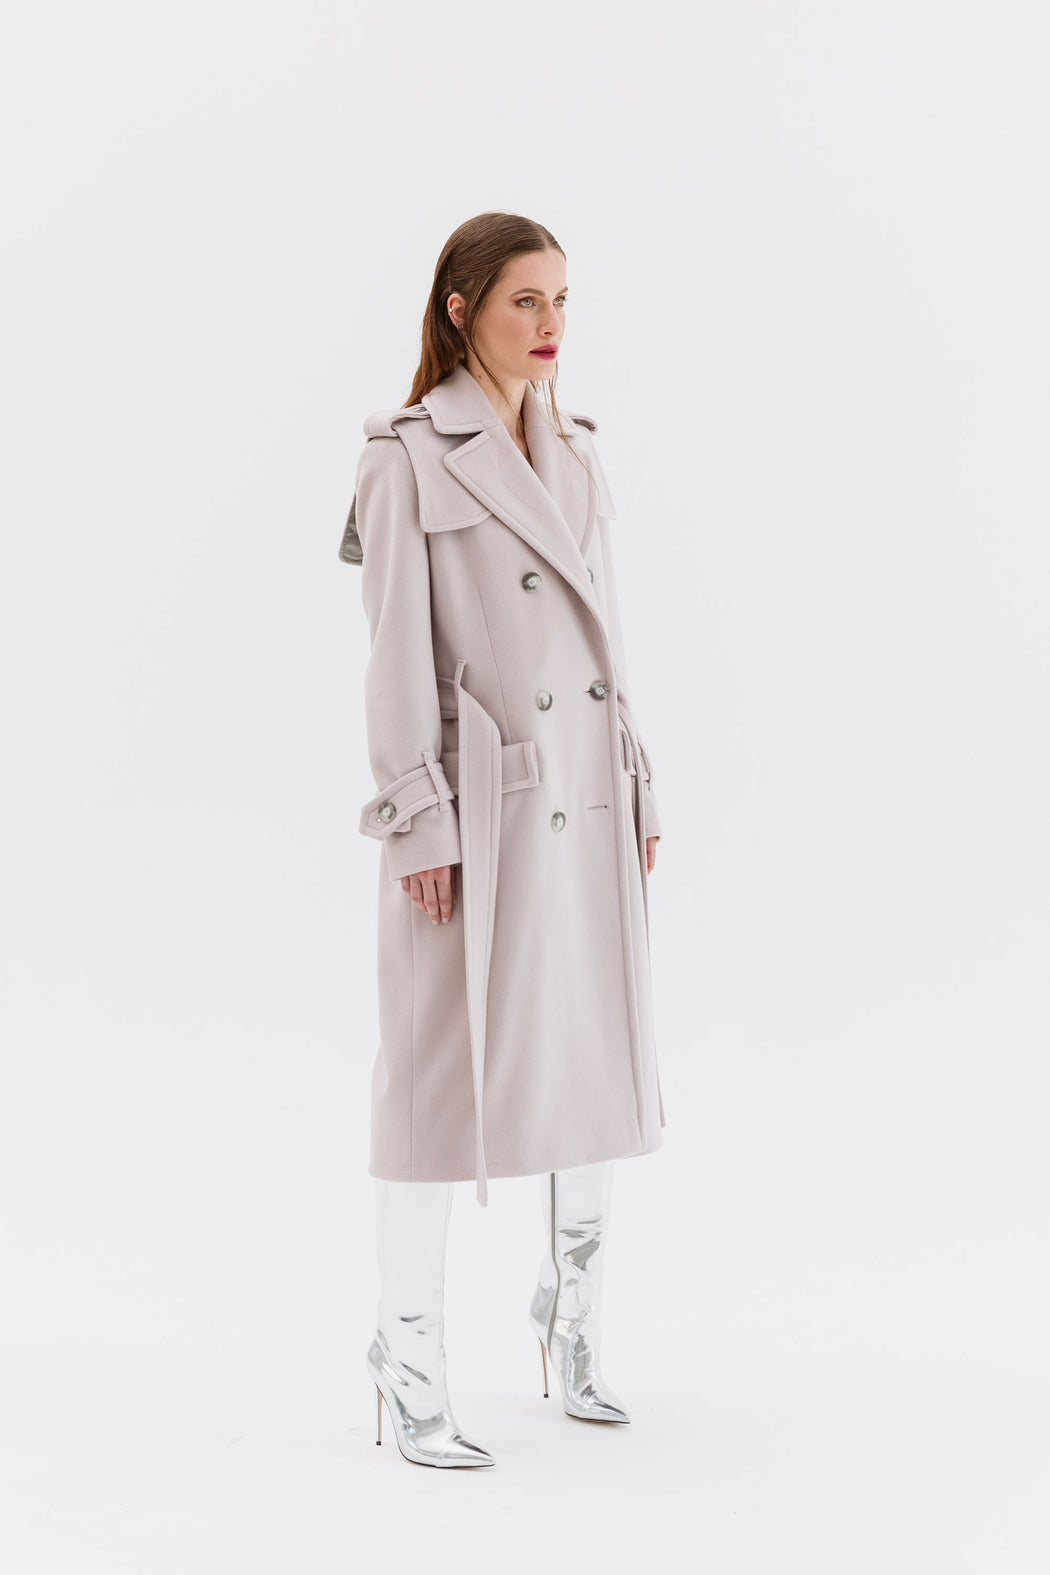 ARCTIC ROSE WOOL TRENCH 22 SALE